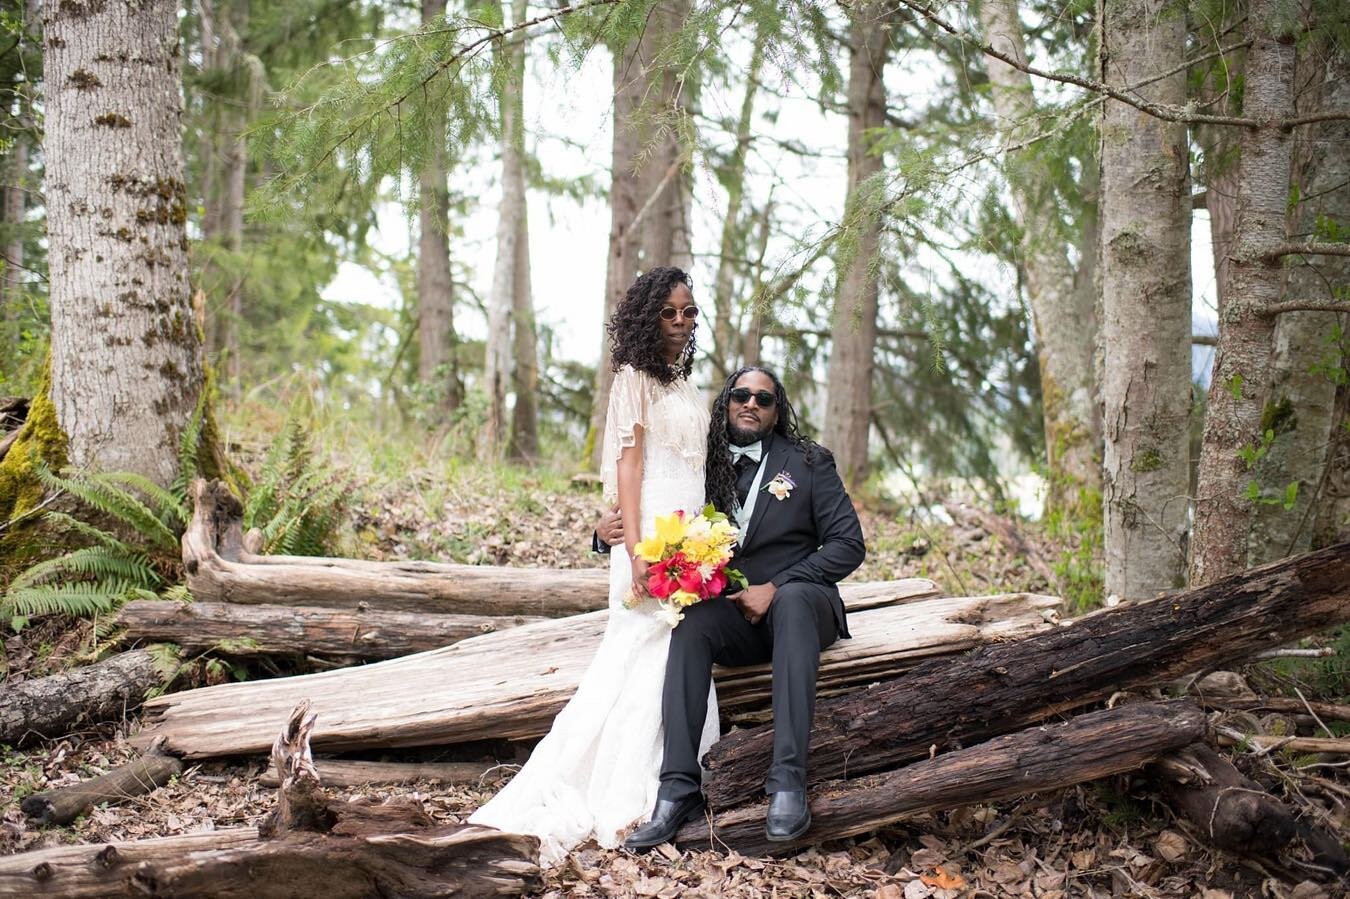 From Kansas City Missouri to Ashford, WA. Saying &lsquo;I Do&rsquo; surrounded by mountains and nature. 
_________________
#KaribaPhotography #seattleweddingphotographer #pnwphotographer #elopmentphotographer #WeddingDay